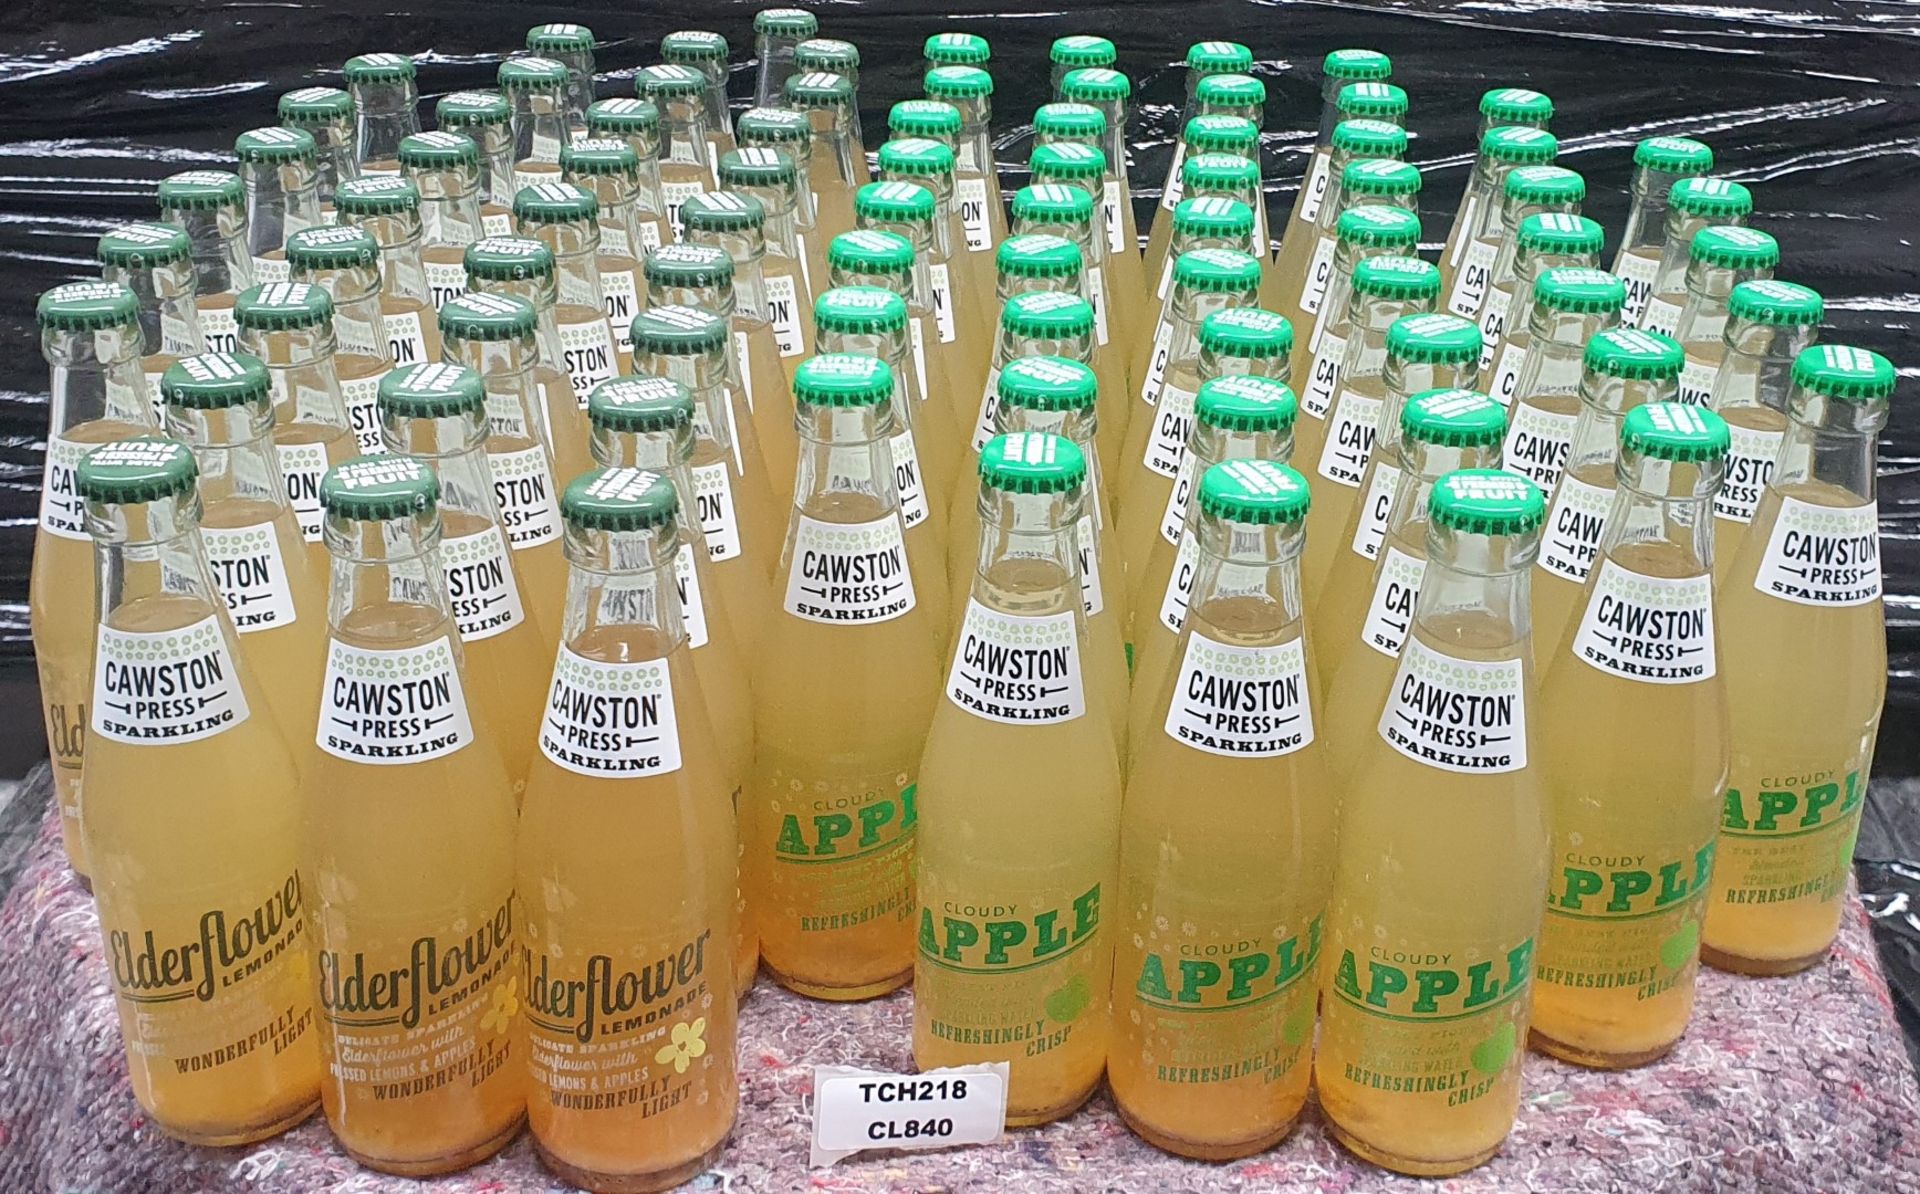 80 x Bottles of Cawston Press 250ml Sparkling Apple and Lemonade Drinks - Ref: TCH218 - CL840 - - Image 7 of 7